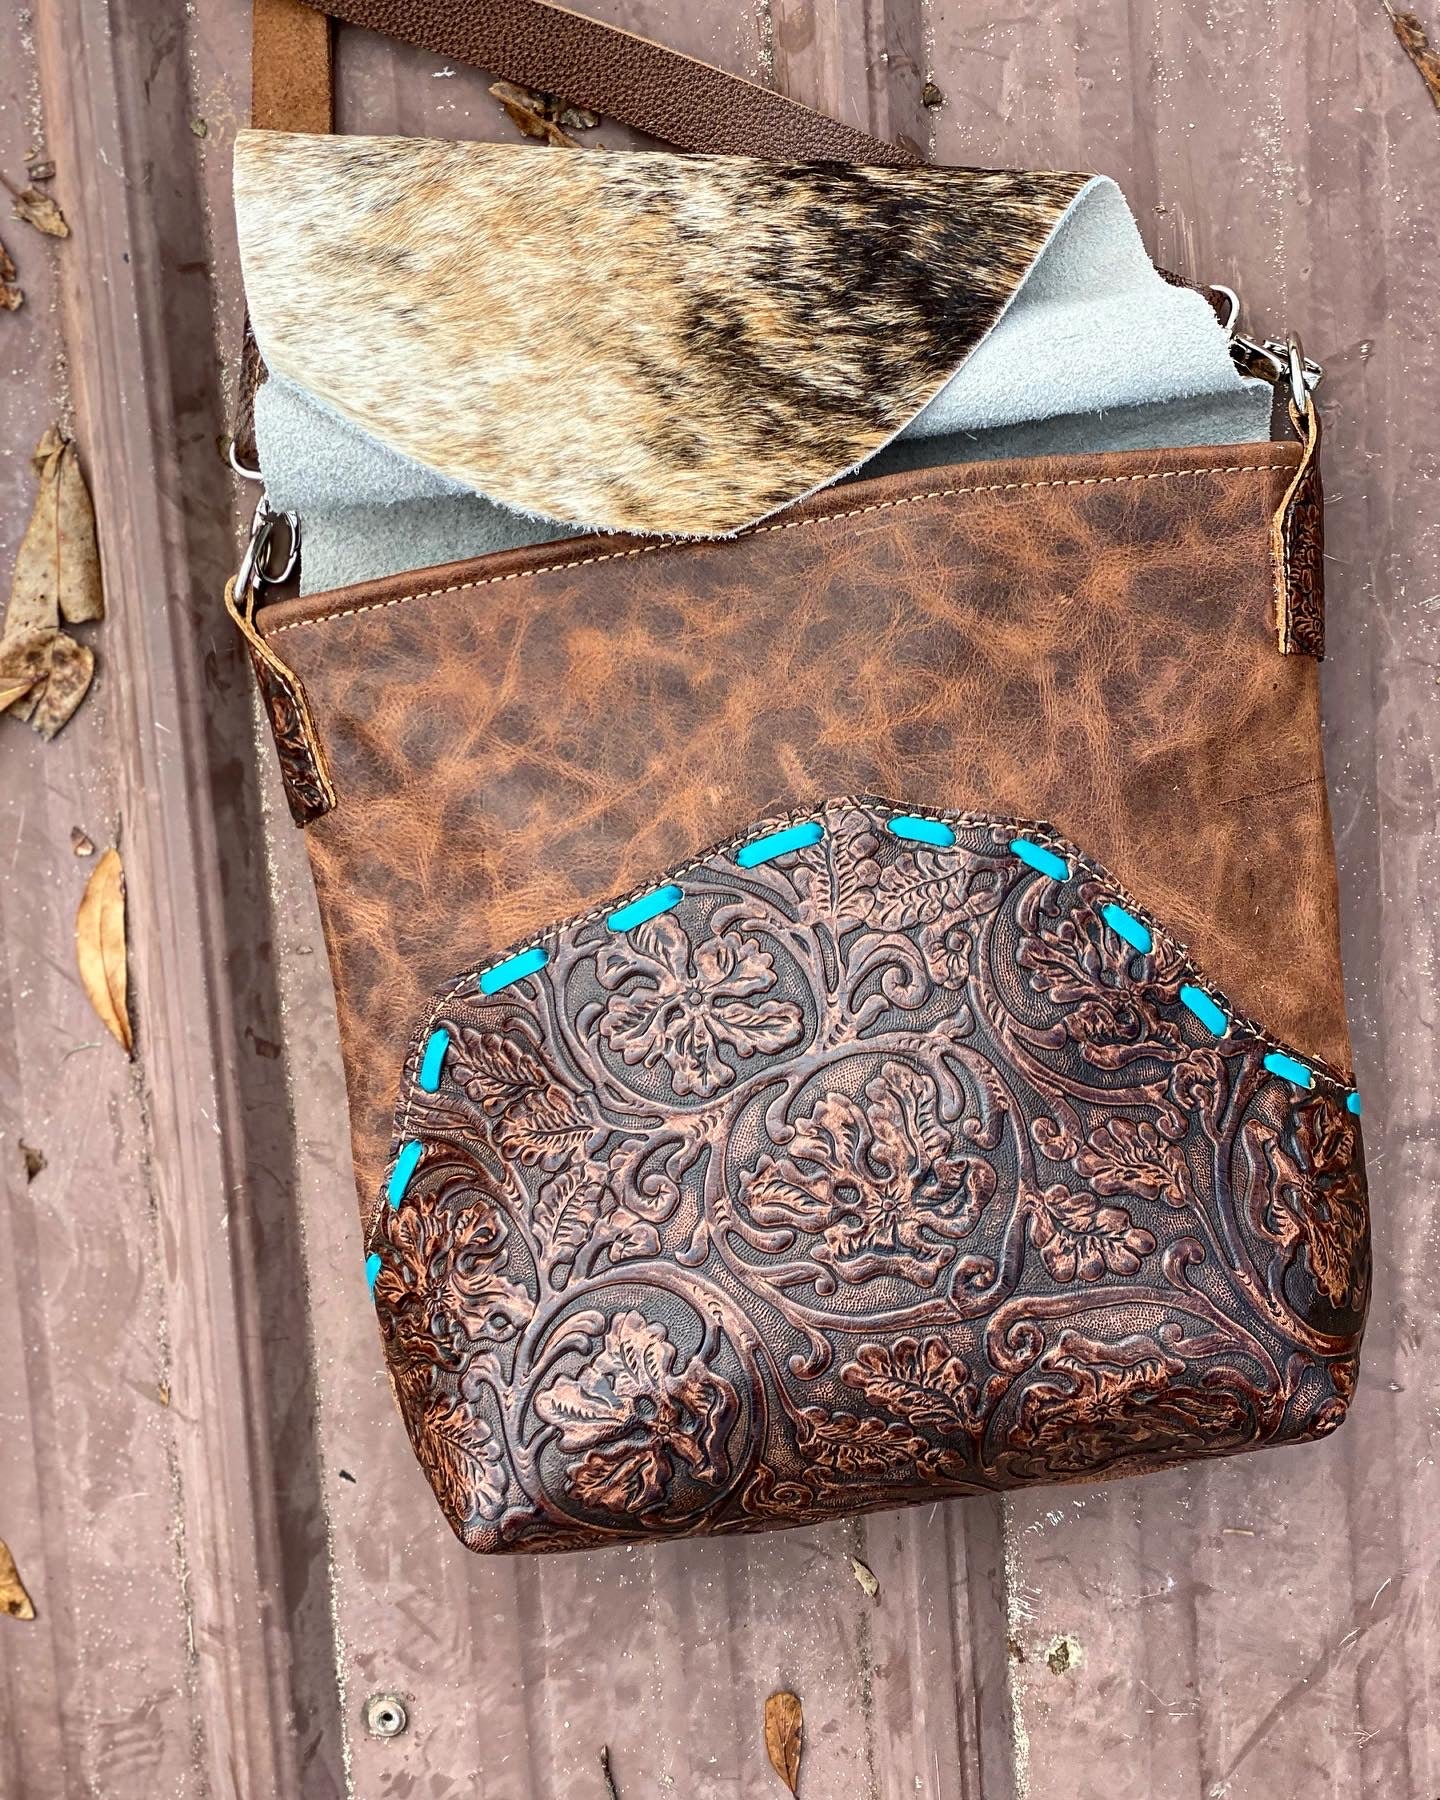 Handy Turquoise Buckstitched Boxed Bottom Purse